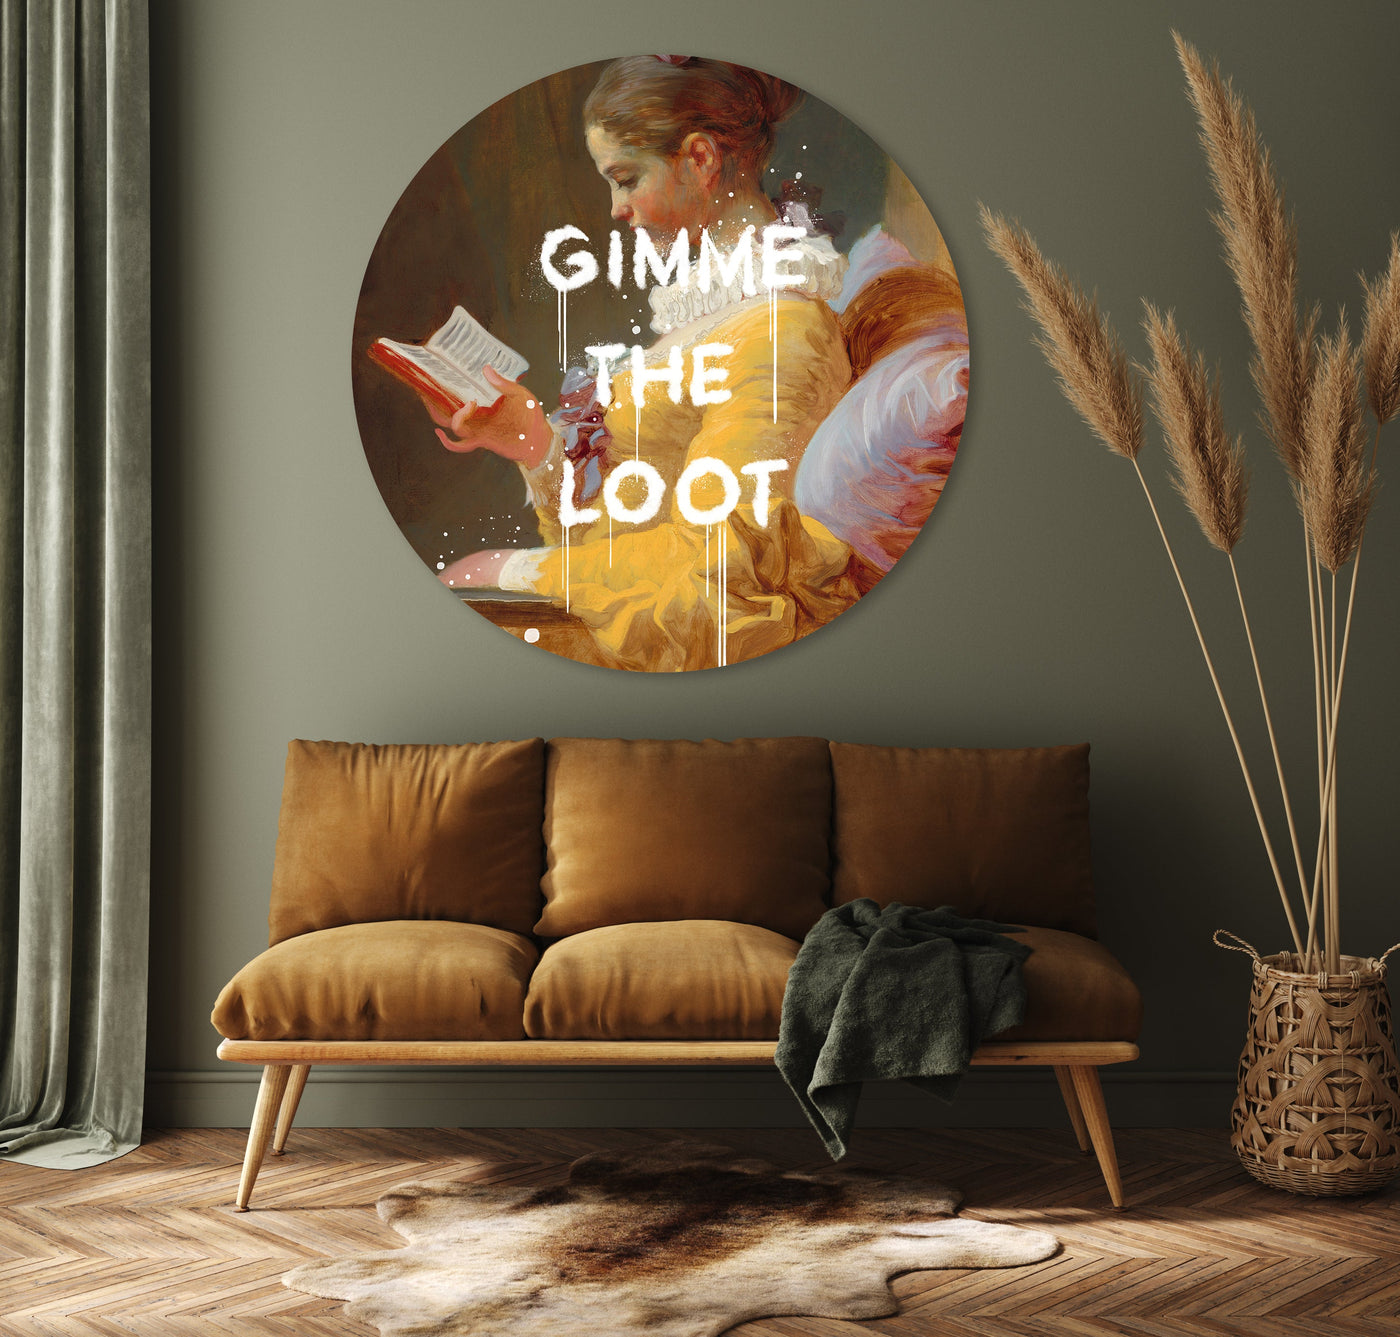 Gimme the loot - FLX Artworks